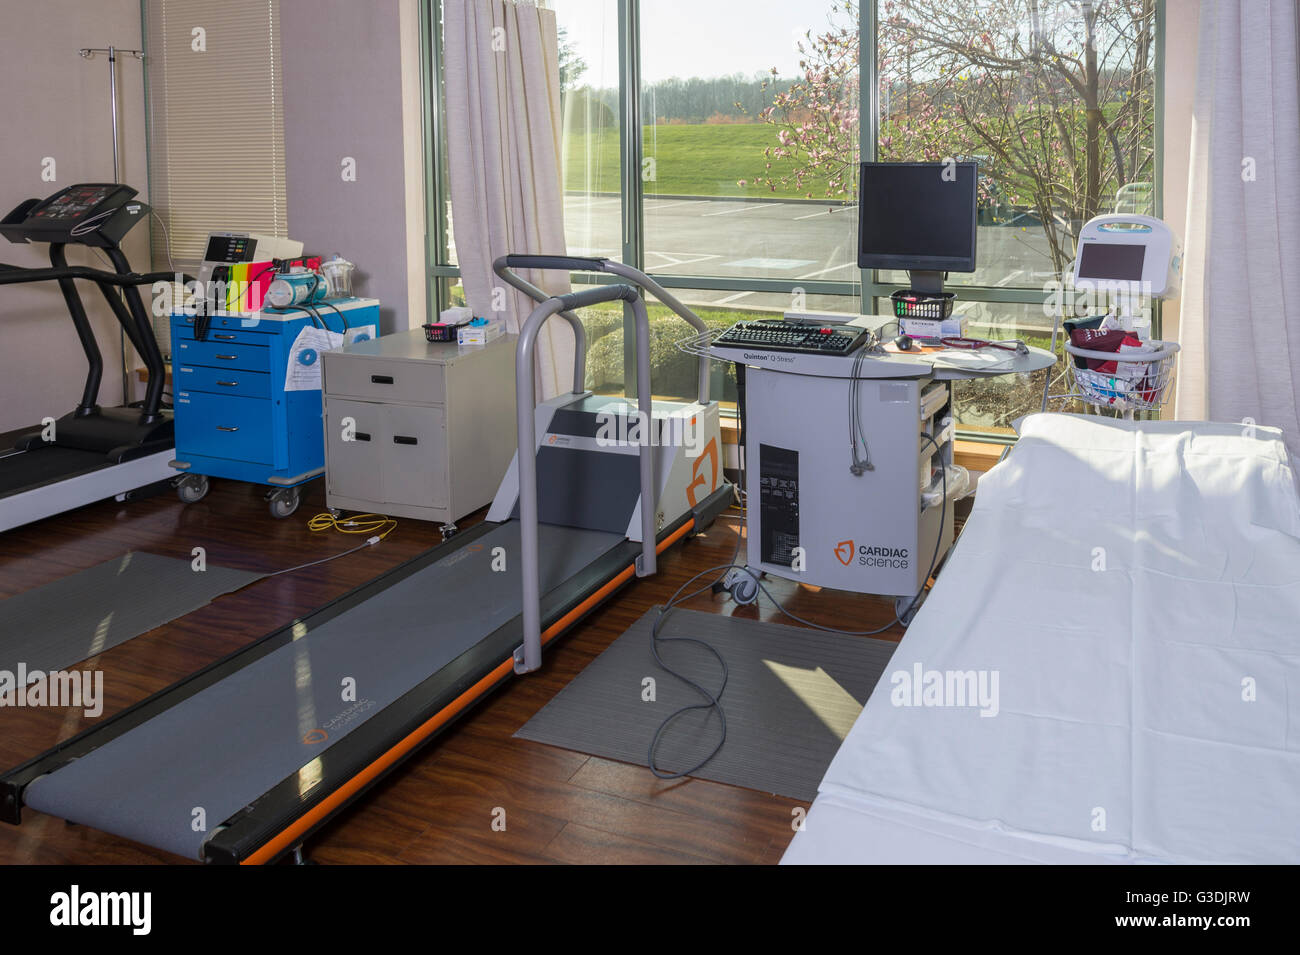 Stress Test Equipment In Physical Therapy Office Stock Photo